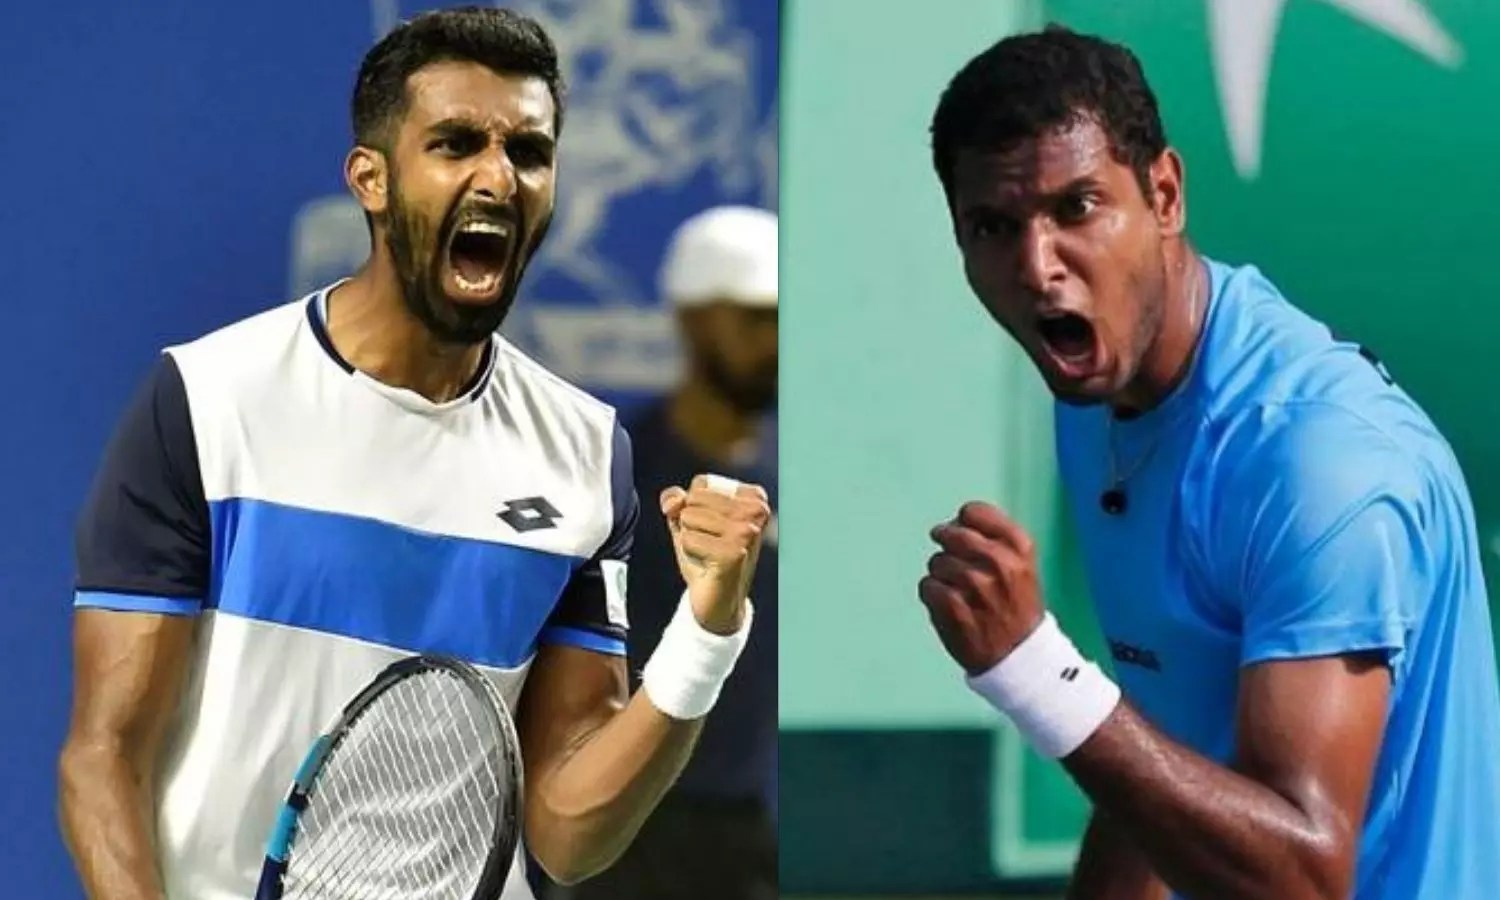 Davis Cup 2022 opening ceremony Live: India vs Norway tie, Date, Time, Live Streaming, Squad, Players, matches all you need to know